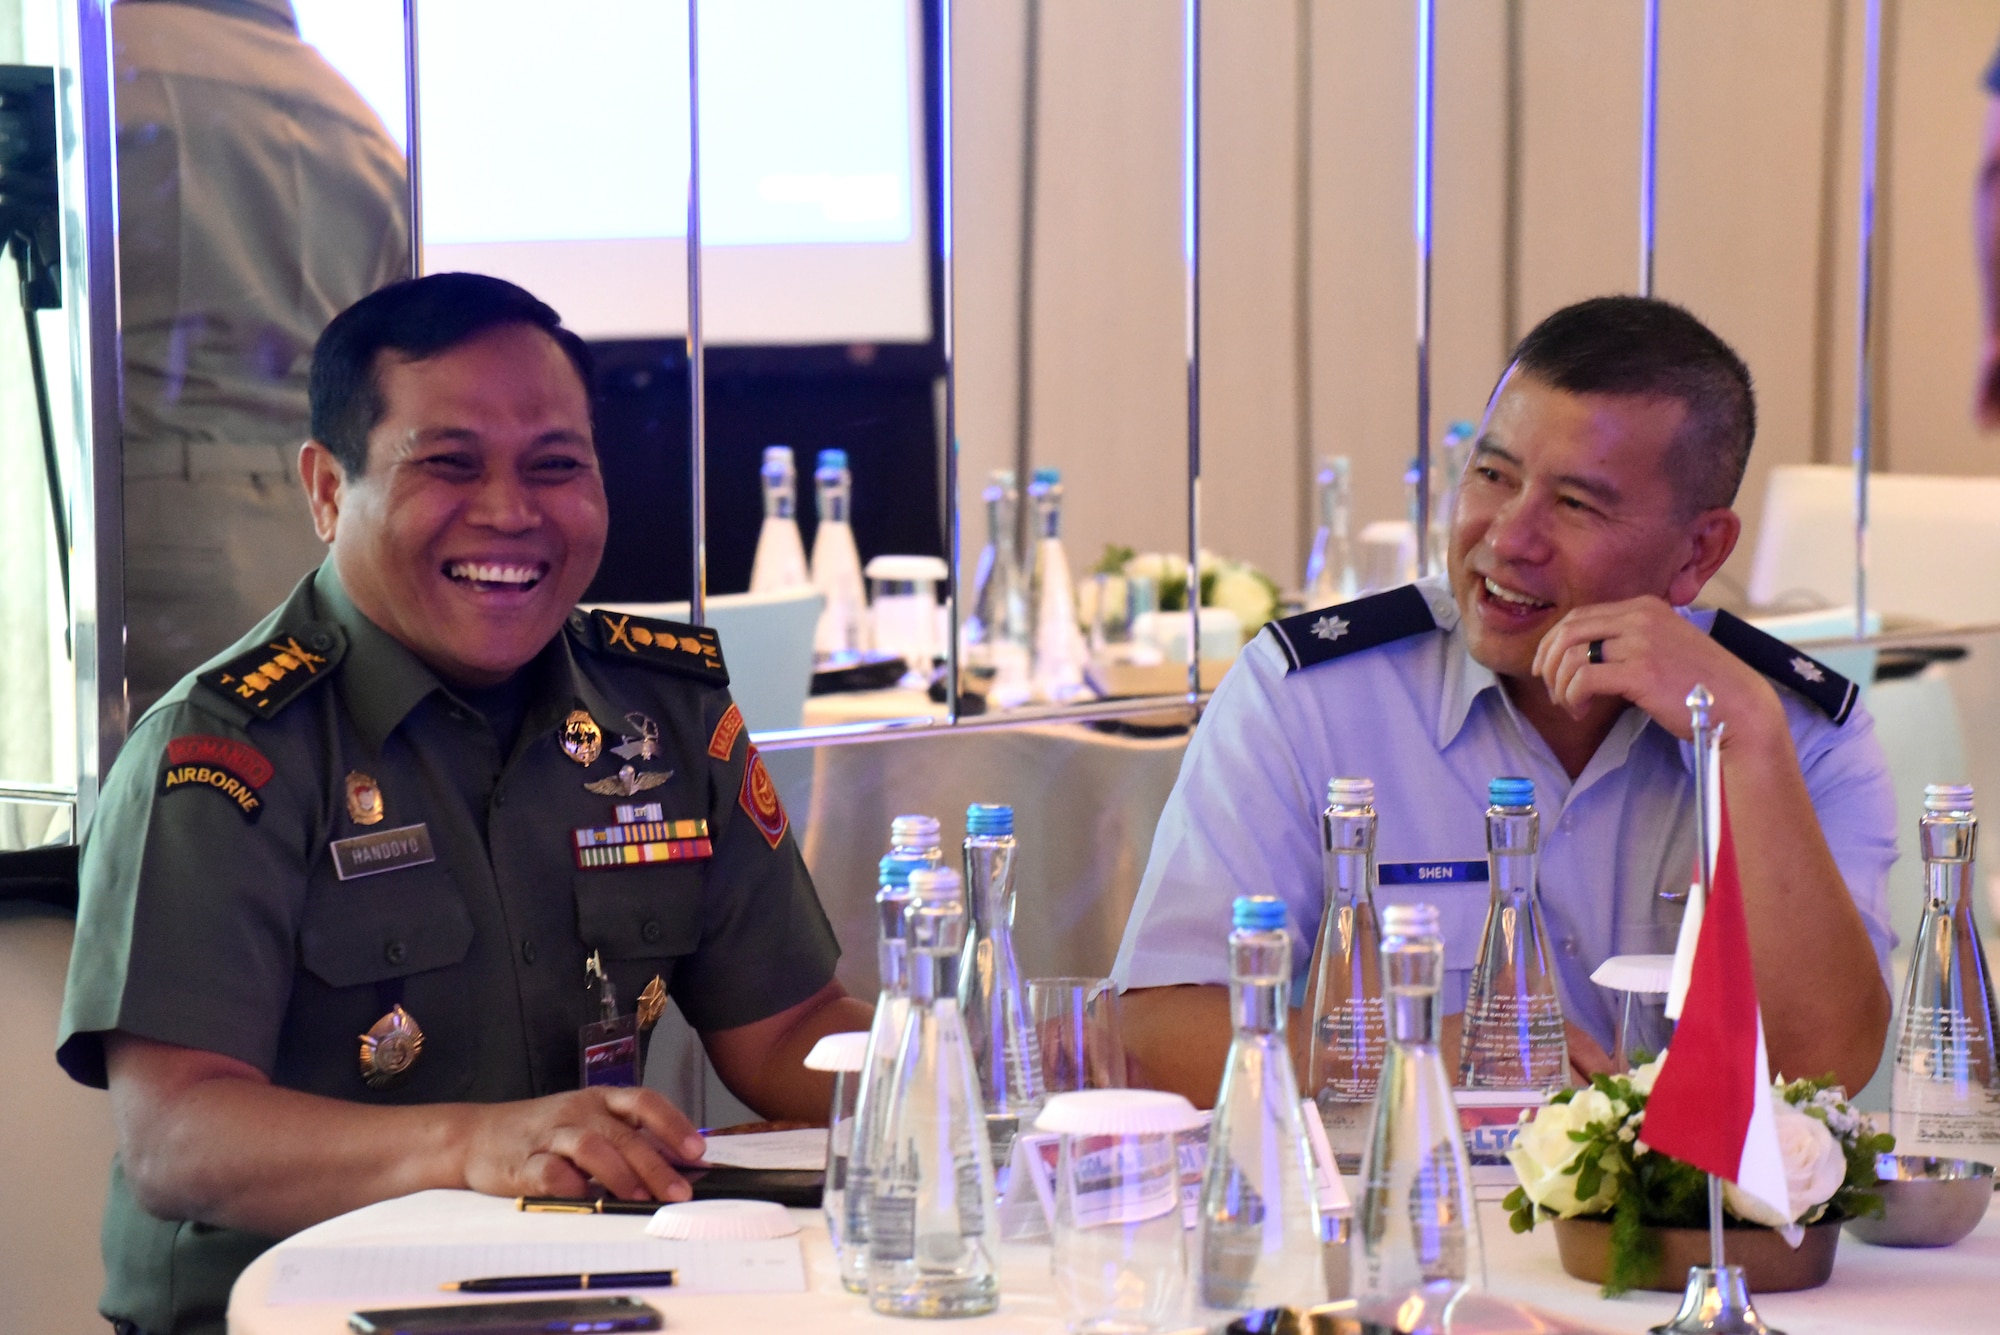 Hawaii Air National Guard Lt. Col. Frances T. Shen, Senior State Partnership Program Cyber Lead, and Tentara Nasional Indonesia Army Col. Achmad Budi Handoyo, Senior Staff Officer for Joint Exercise Operations Staff TNI HQ, have a discussion prior to opening remarks of the 2019 Information System and Technology Exchange, July 22, 2019, Jakarta, Indonesia. This year’s third annual ISTX falls under the Hawaii National Guard’s State Partnership Program, and aims to share best practices, assist in cybersecurity doctrine development, and enhance the cybersecurity capabilities to effectively defend and protect critical cyber information infrastructure from malicious virus and cyber intrusion.